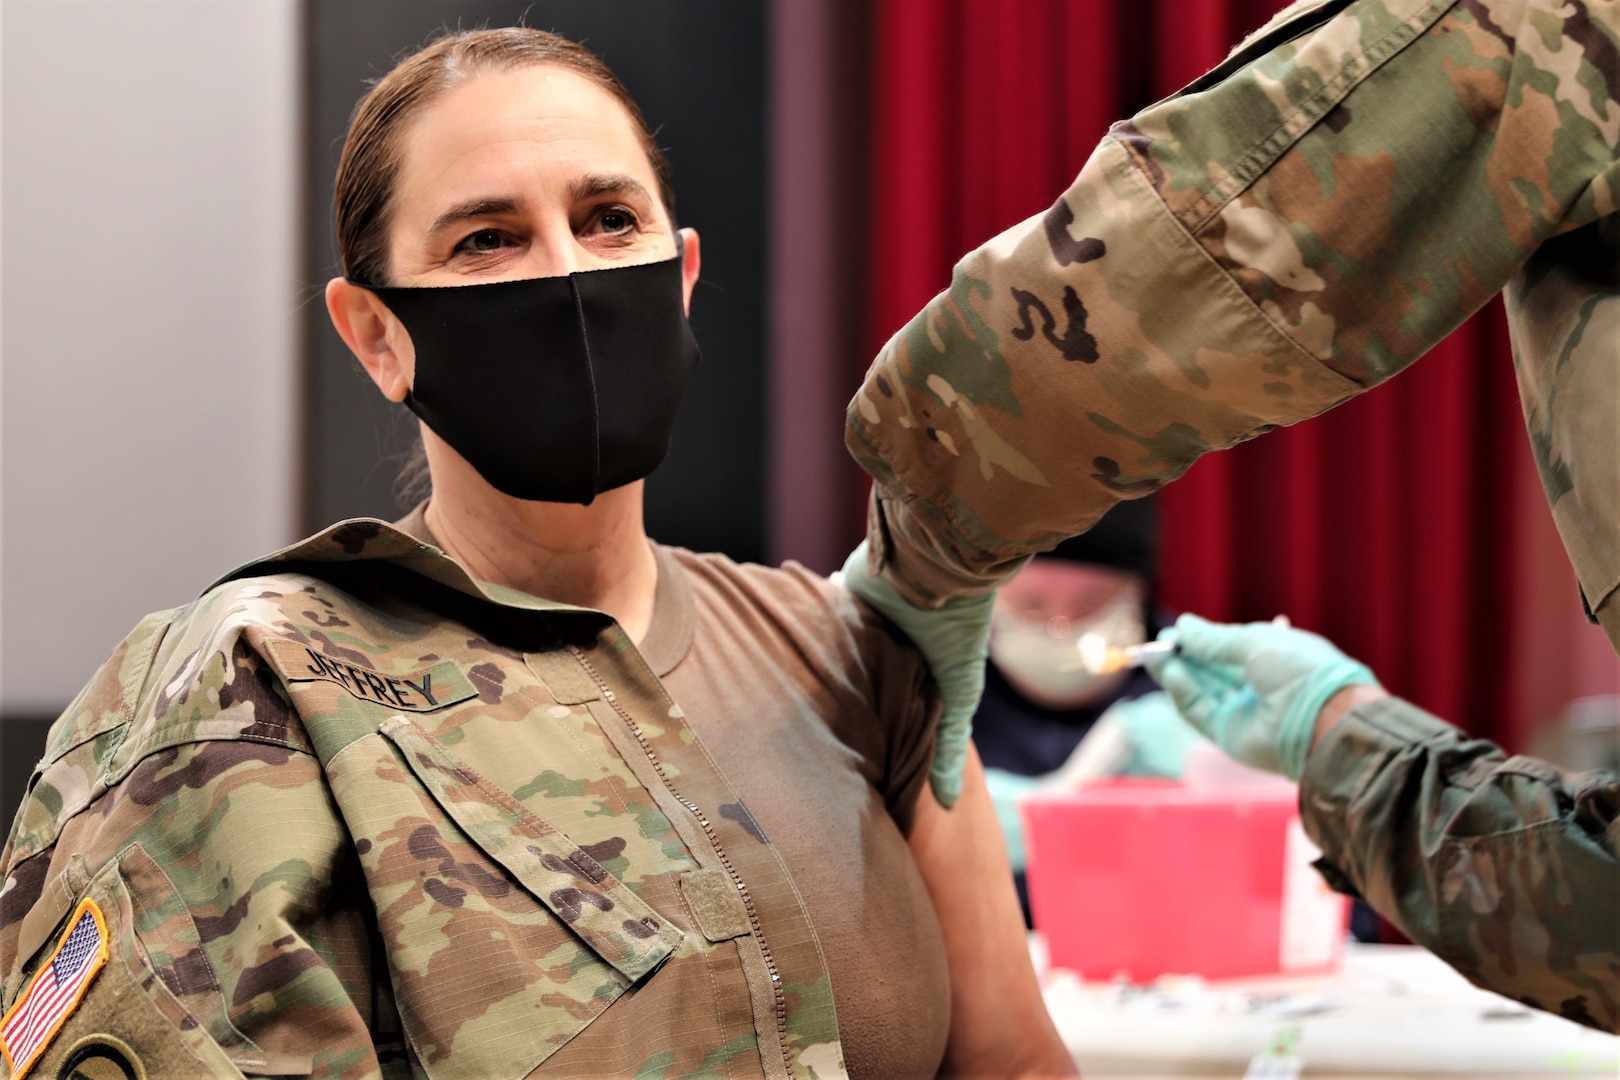 U.S. Army Health Clinic Hohenfels conducted its first inoculations of healthcare workers and first responders with the Moderna COVID-19 vaccine at the Hohenfels movie theater, Hohenfels Training Area, Germany, Dec. 31, 2020. Lt. Col. Laura Jeffrey, USAHC Hohenfels clinic commander and registered nurse, was first to receive the vaccine in the Hohenfels military community.